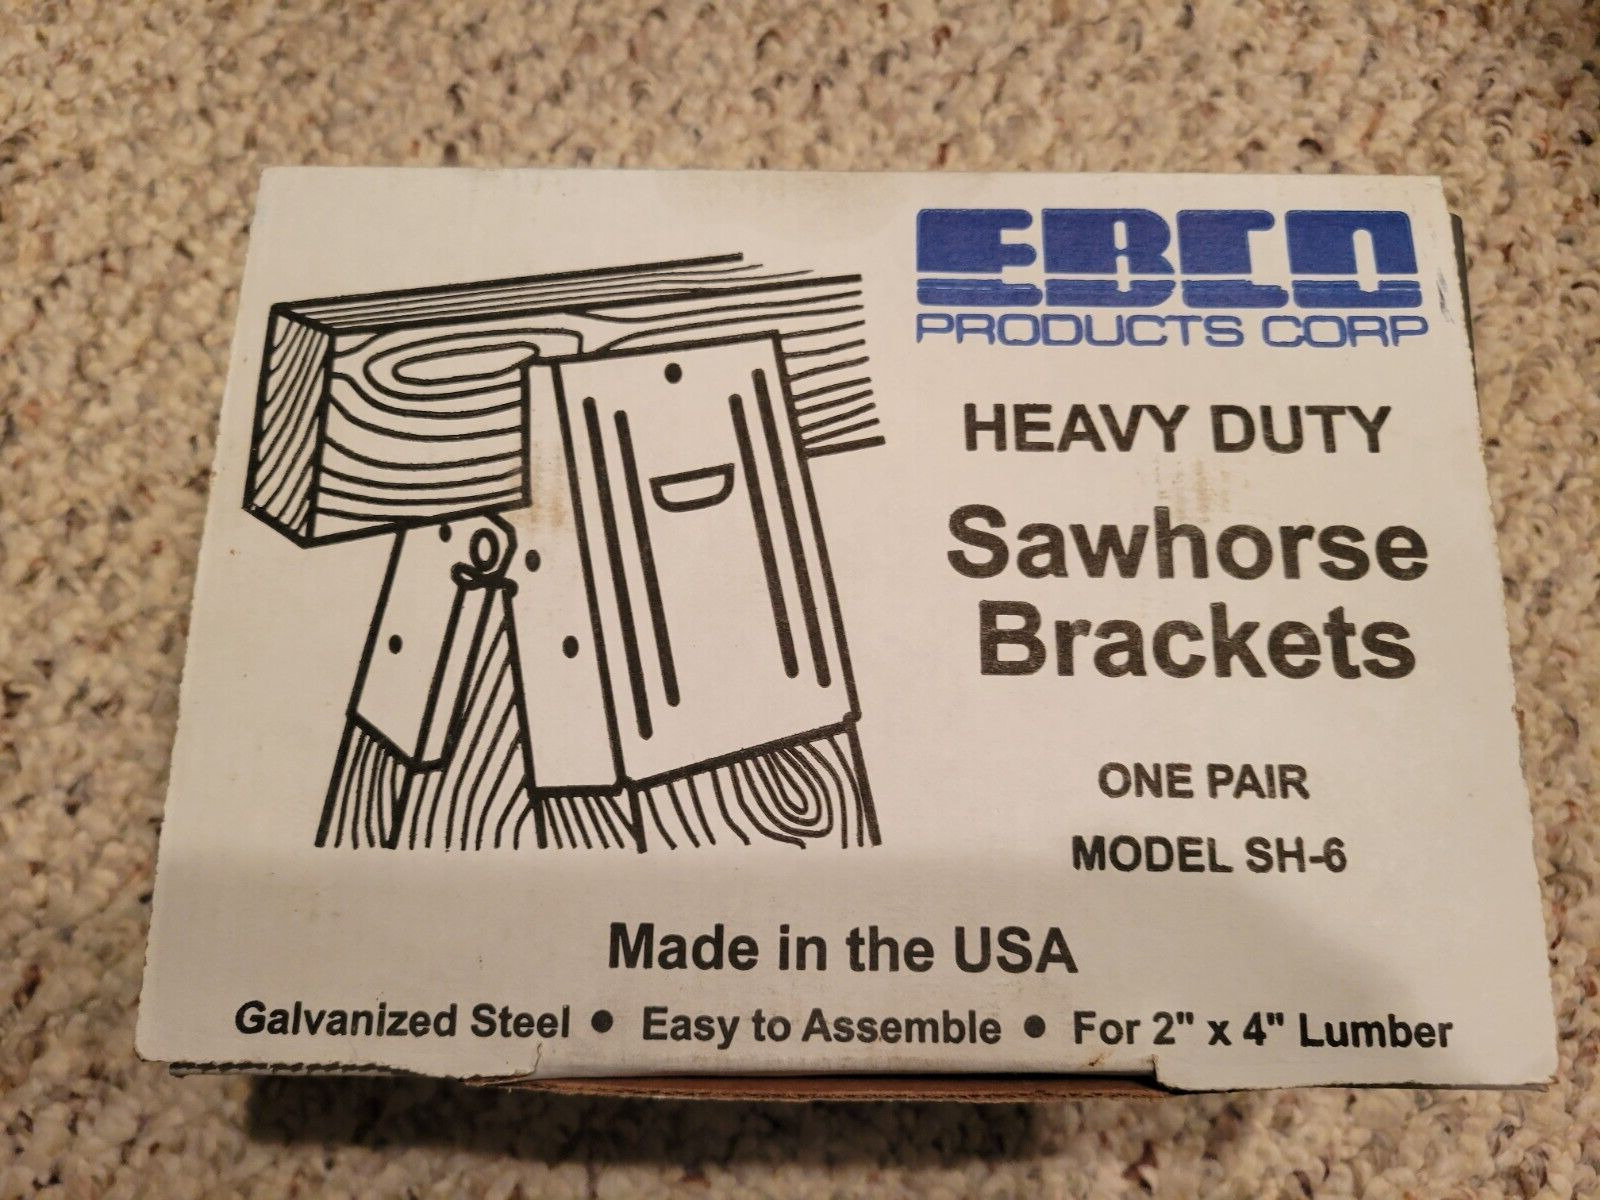 Ebco Products Co Galvanized Steel Heavy Duty Sawhorse Brackets One Pair SH-6